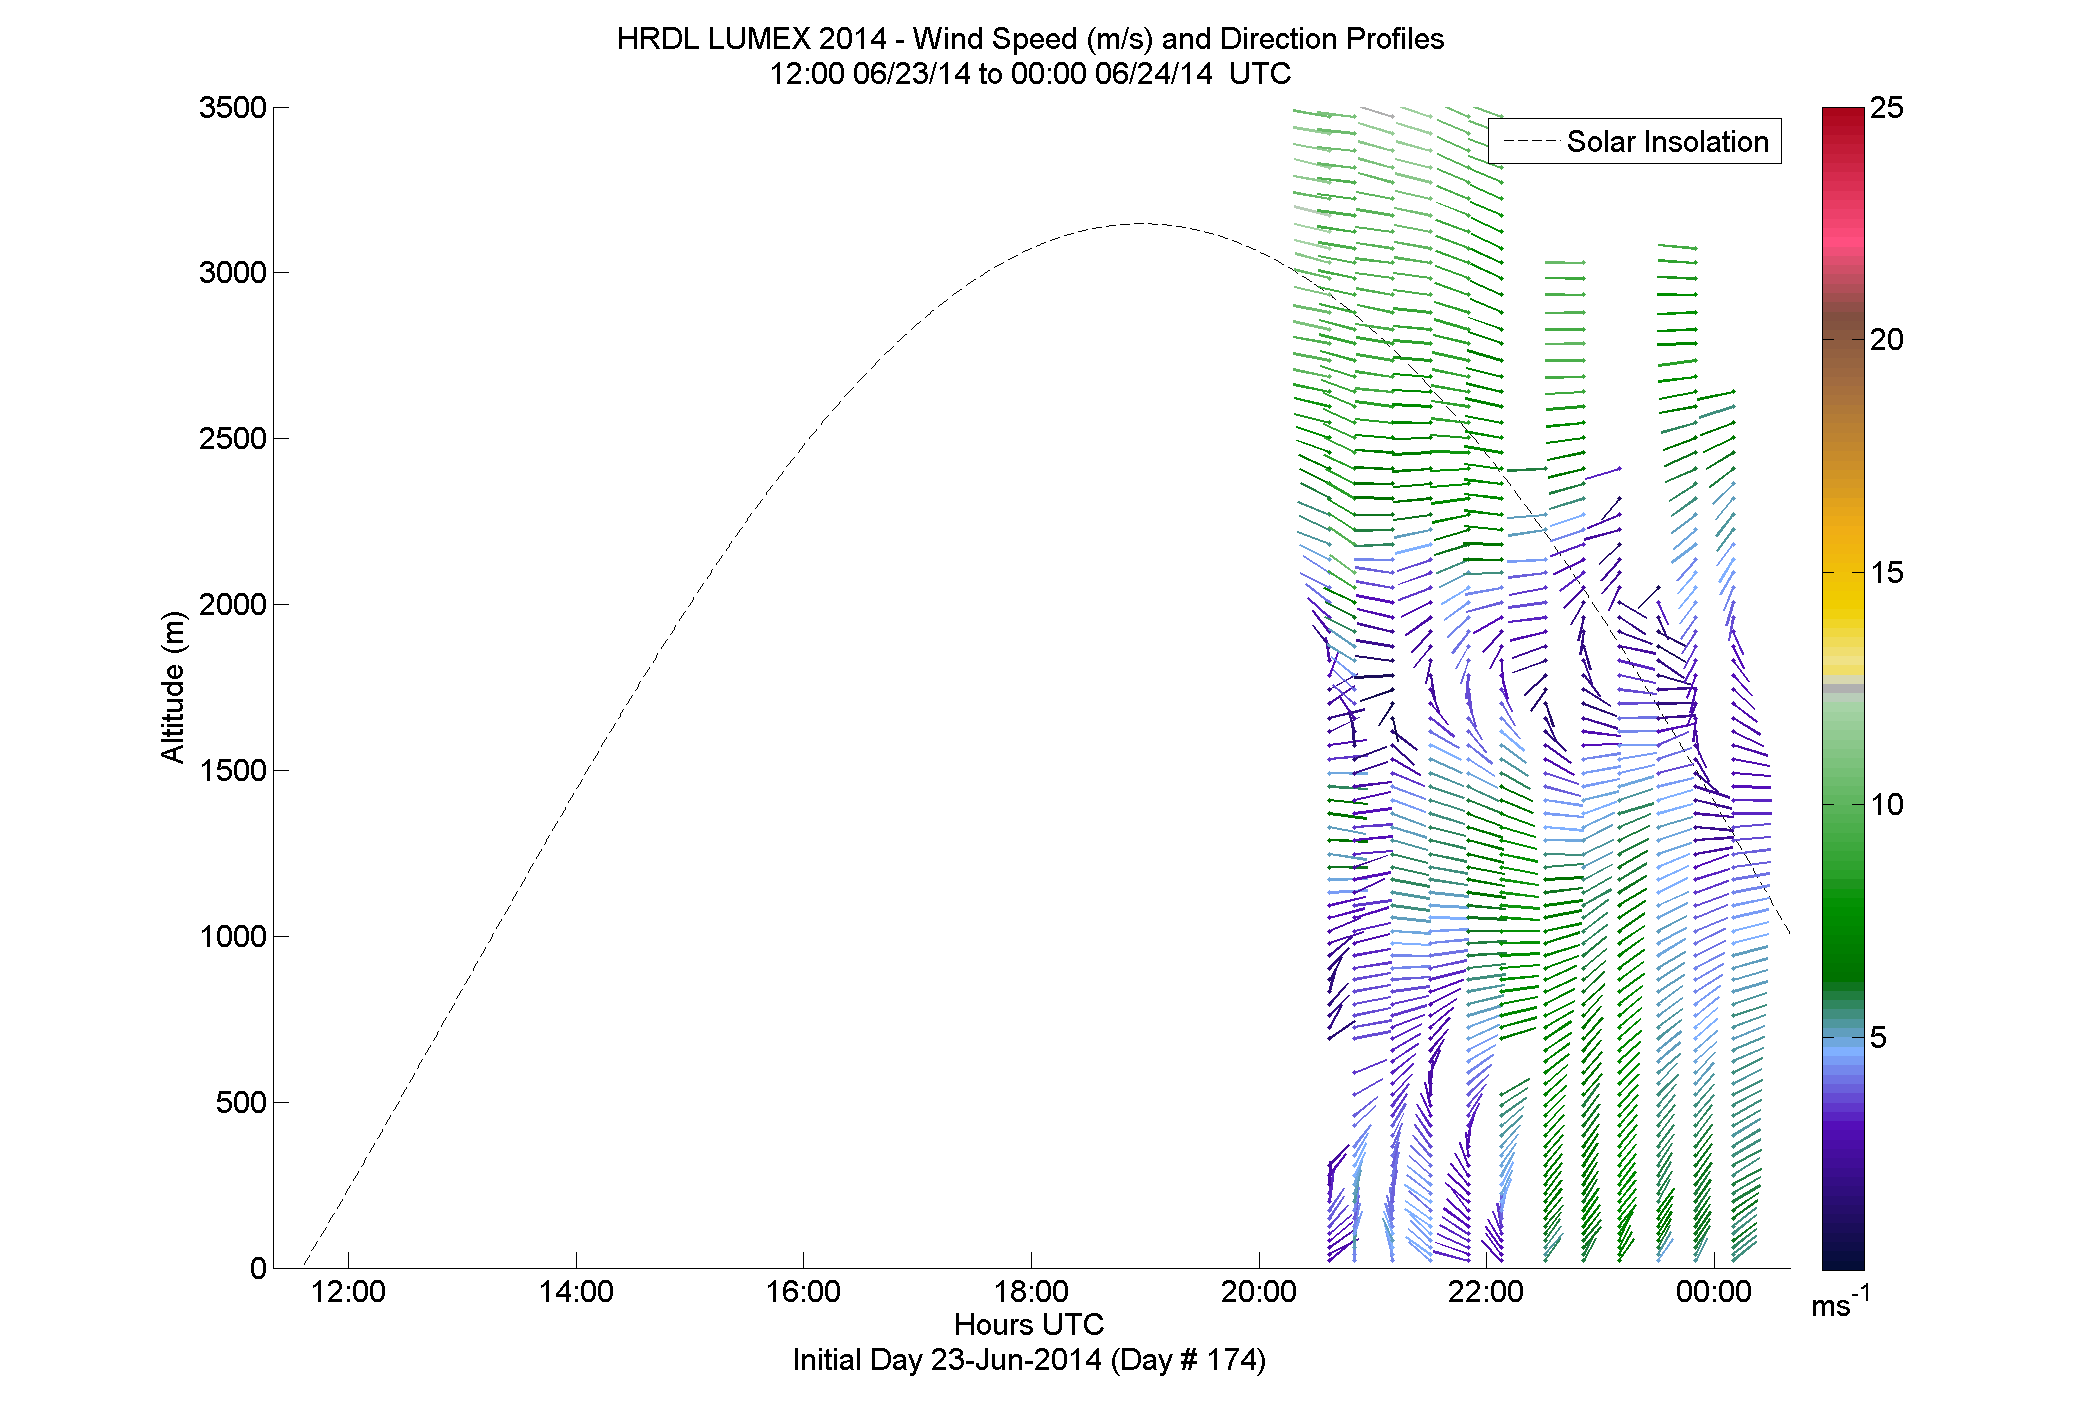 HRDL speed and direction profile - June 23 pm